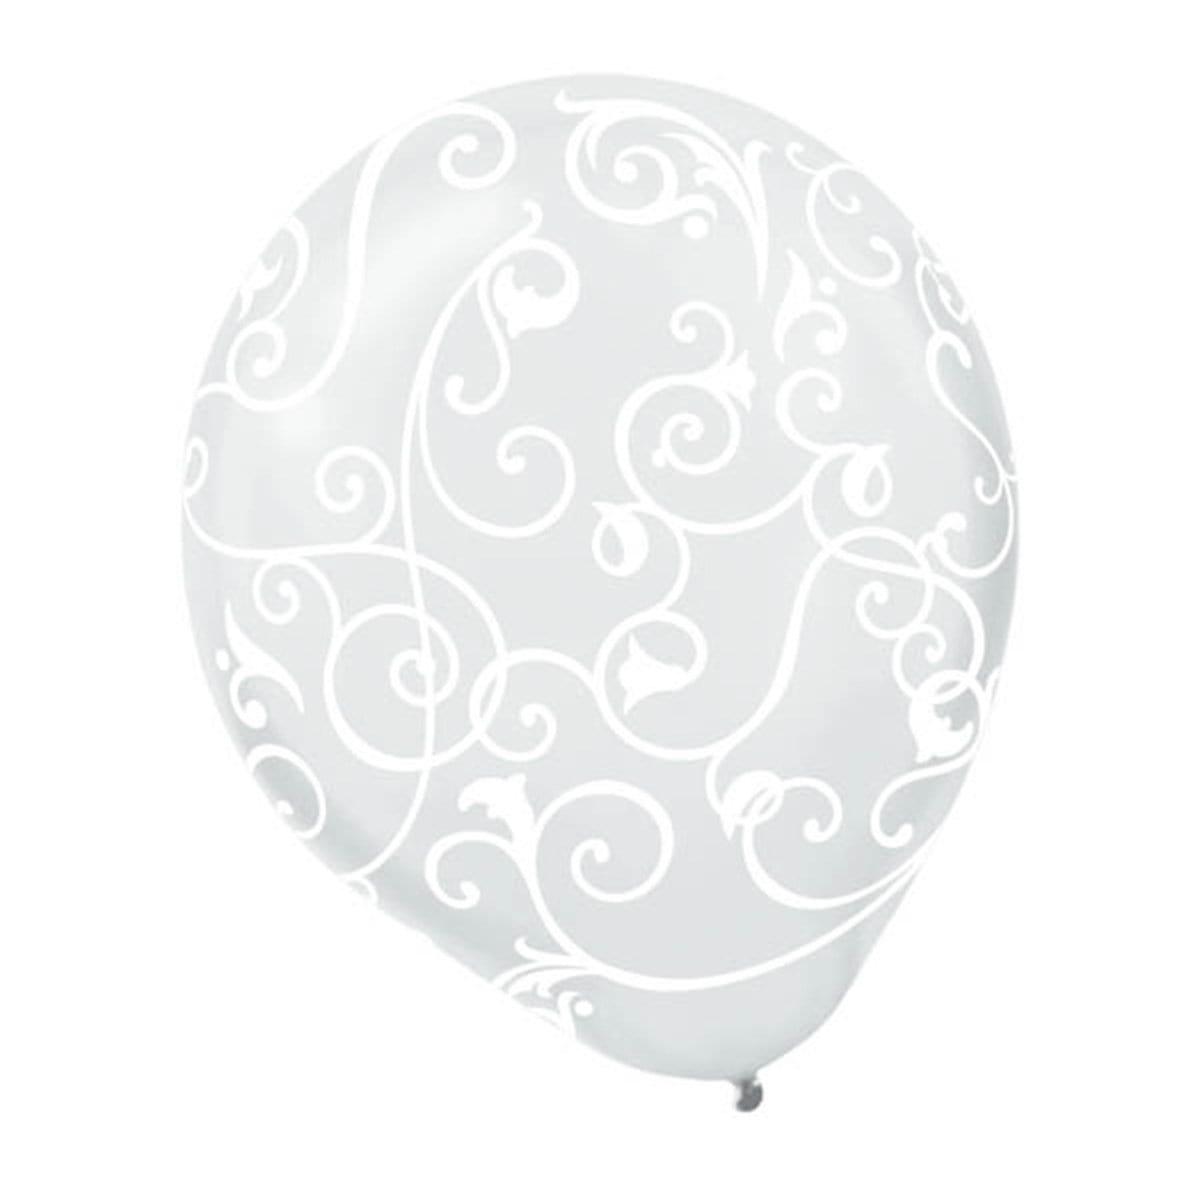 Buy Balloons Clear Latex Balloon With Scroll Print, 12 Inches, 6 Count sold at Party Expert